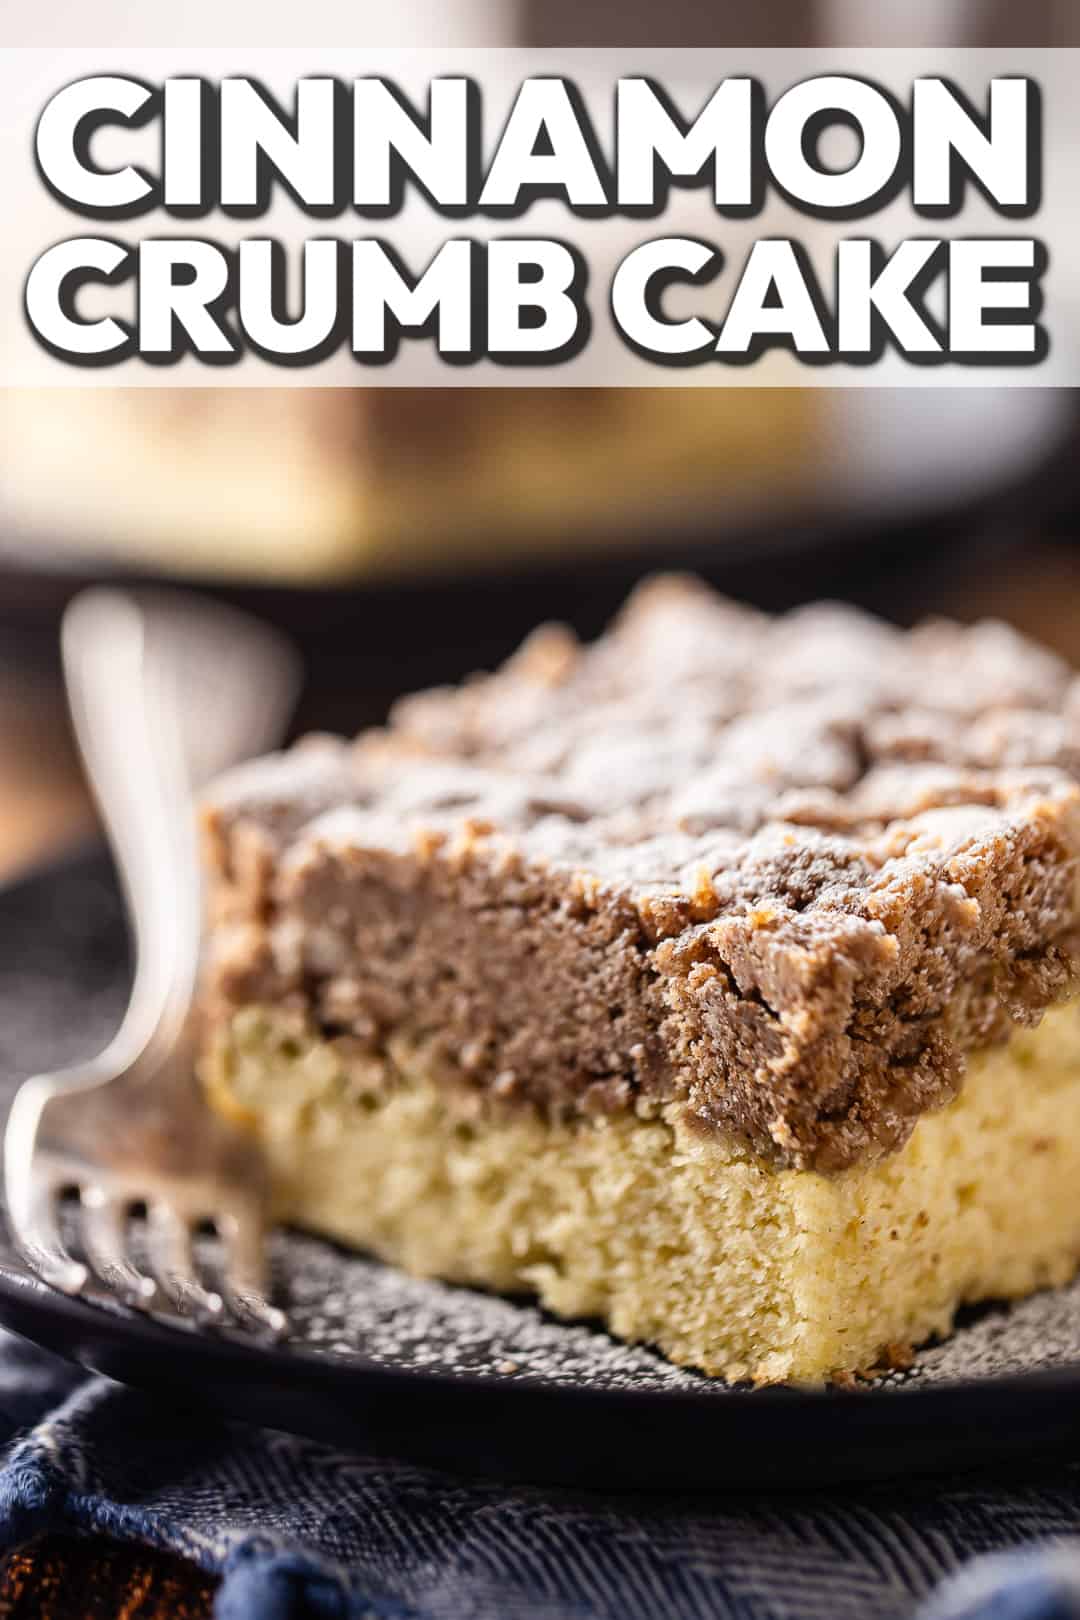 Crumb cake recipe, made with double the streusel topping, presented on a plate and dusted with powdered sugar.